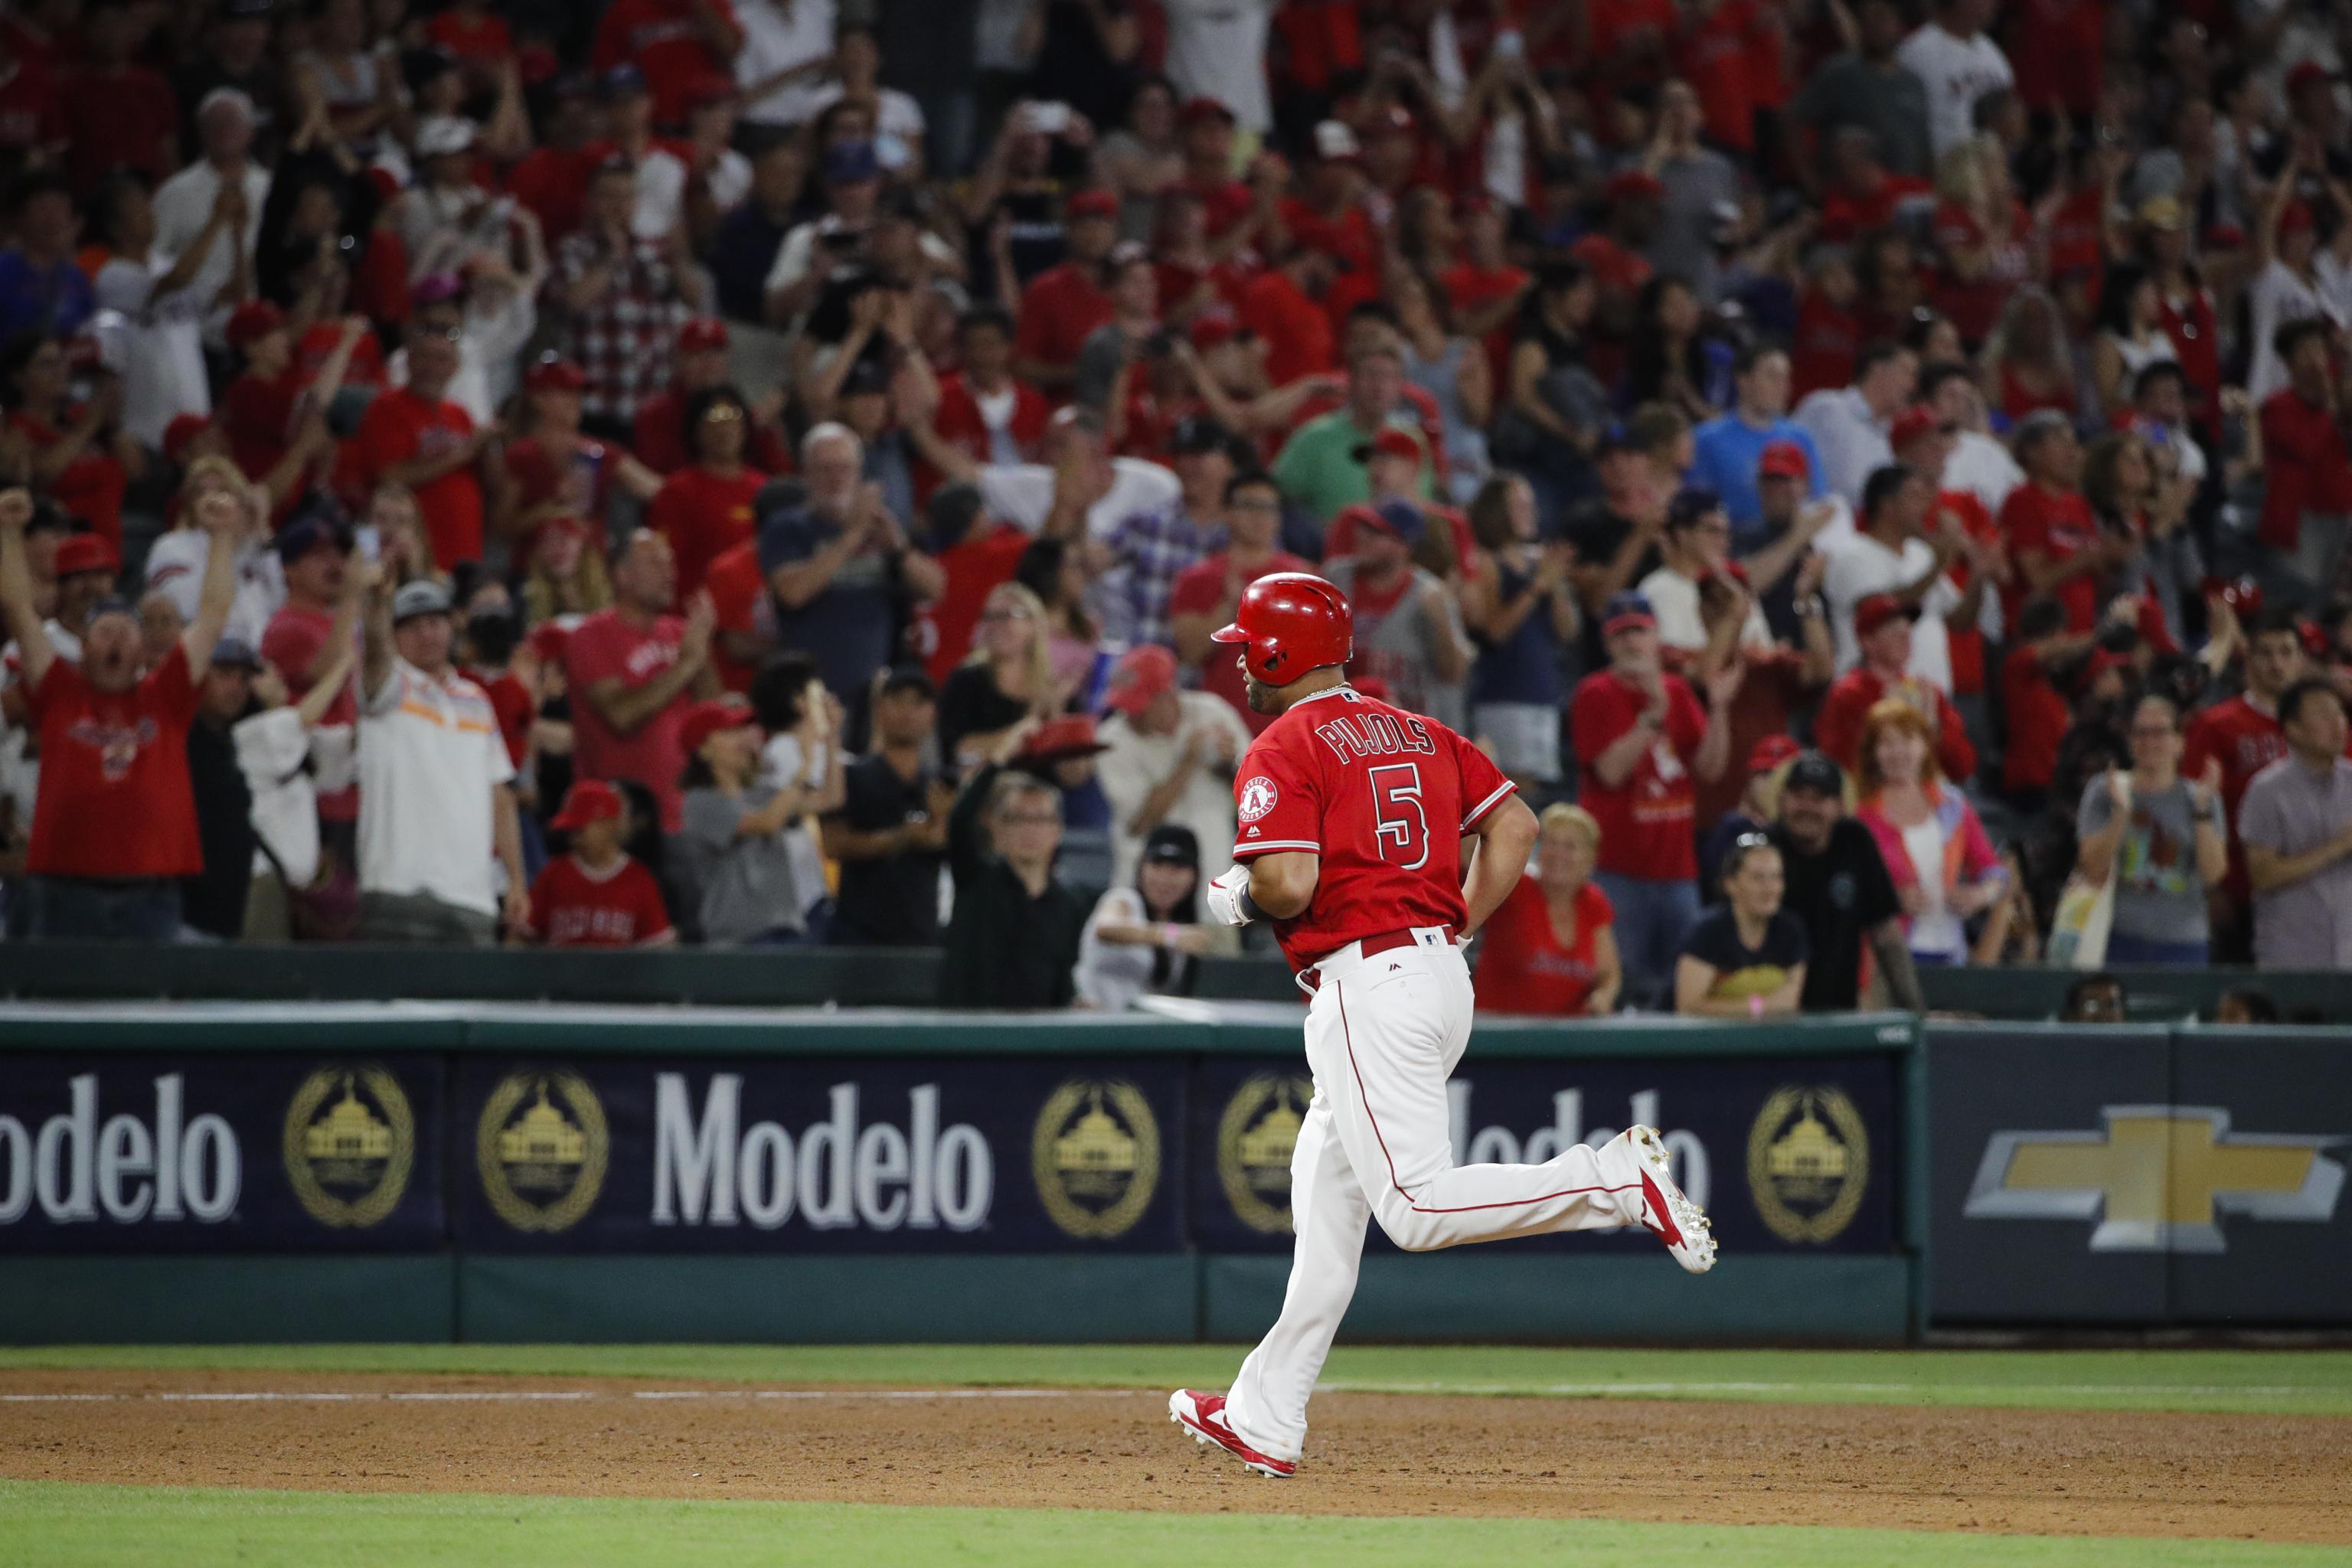 Albert Pujols passed Ken Griffey Jr. for sixth place on home run list